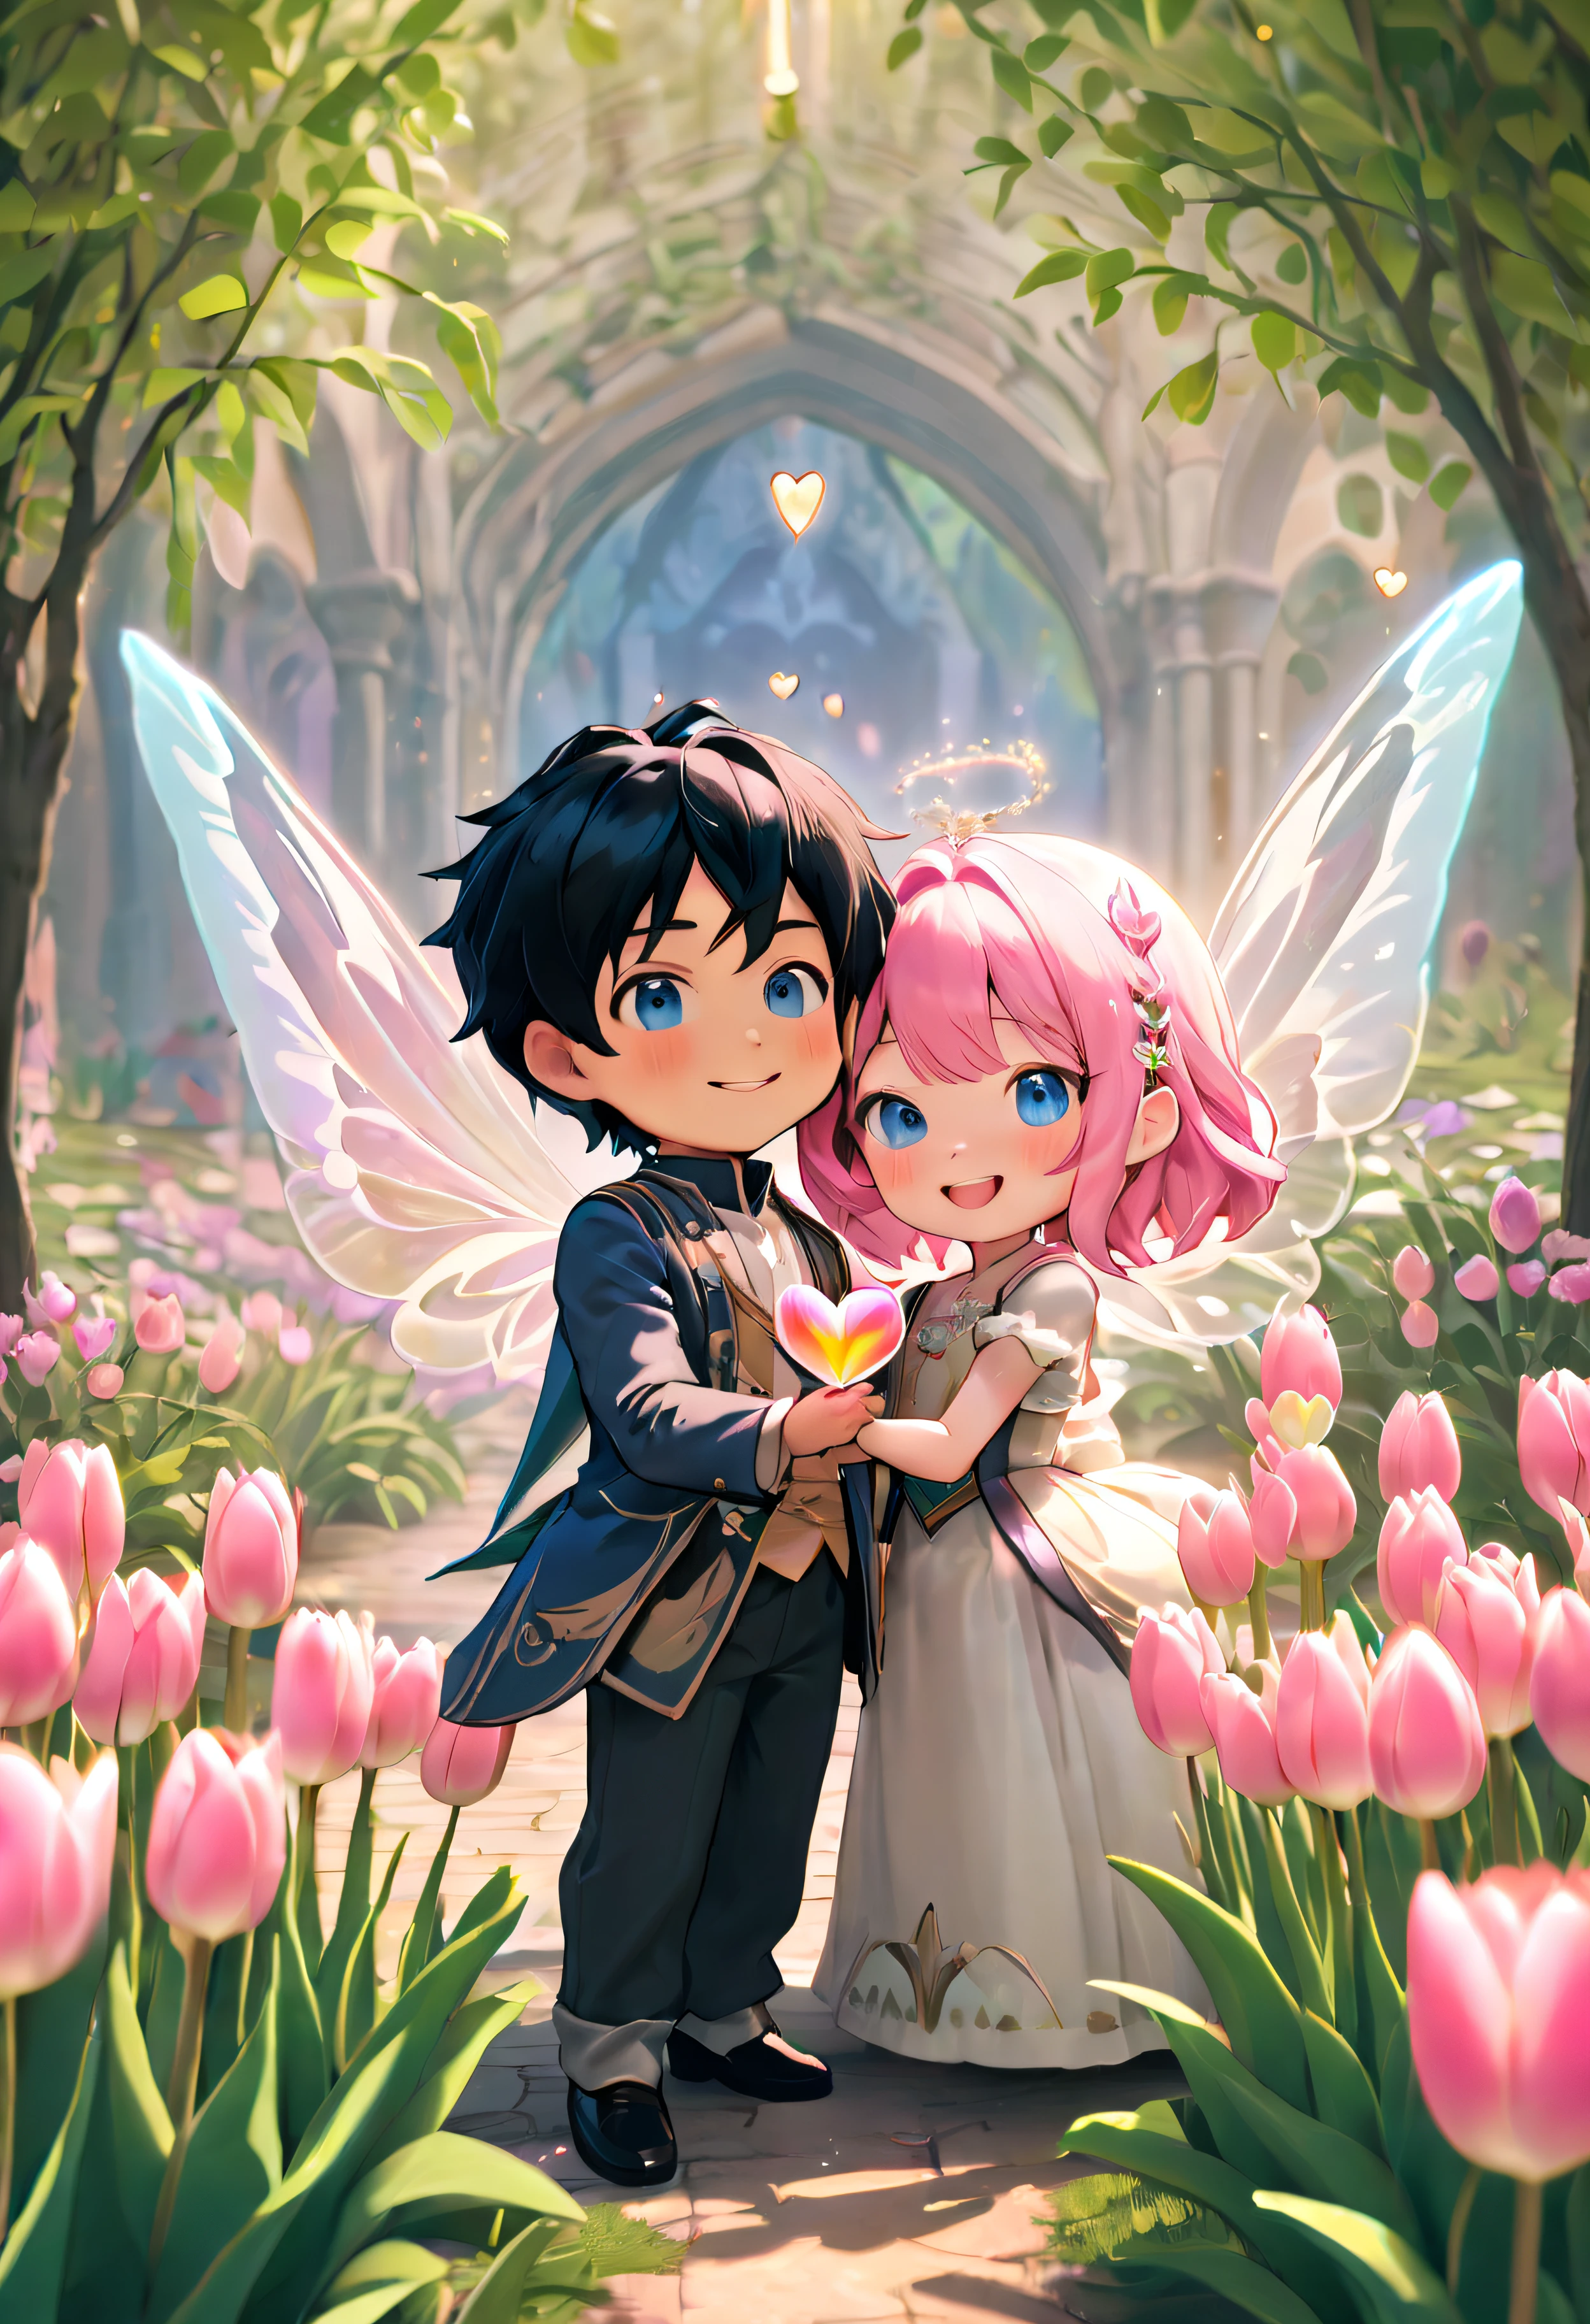 Lalafell boy has black hair, blue eyes, and wears elegant noble clothing. The Lalafell girl has pink hair, blue eyes, and dons a matching noble outfit. Both are Smiling and adorned with delicate, ethereal fairy wings, Mid-shot,Camera Angle: Eye-Level, Background: The lush gardens of the Brimming Heart in Gridania, filled with vibrant flowers and magical lights, best quality, masterpiece, ultra-detailed, 8k, depth of field, cinematic composition, light Soft, natural lighting with a touch of fantasy glow, boy give pink tulips to girl.